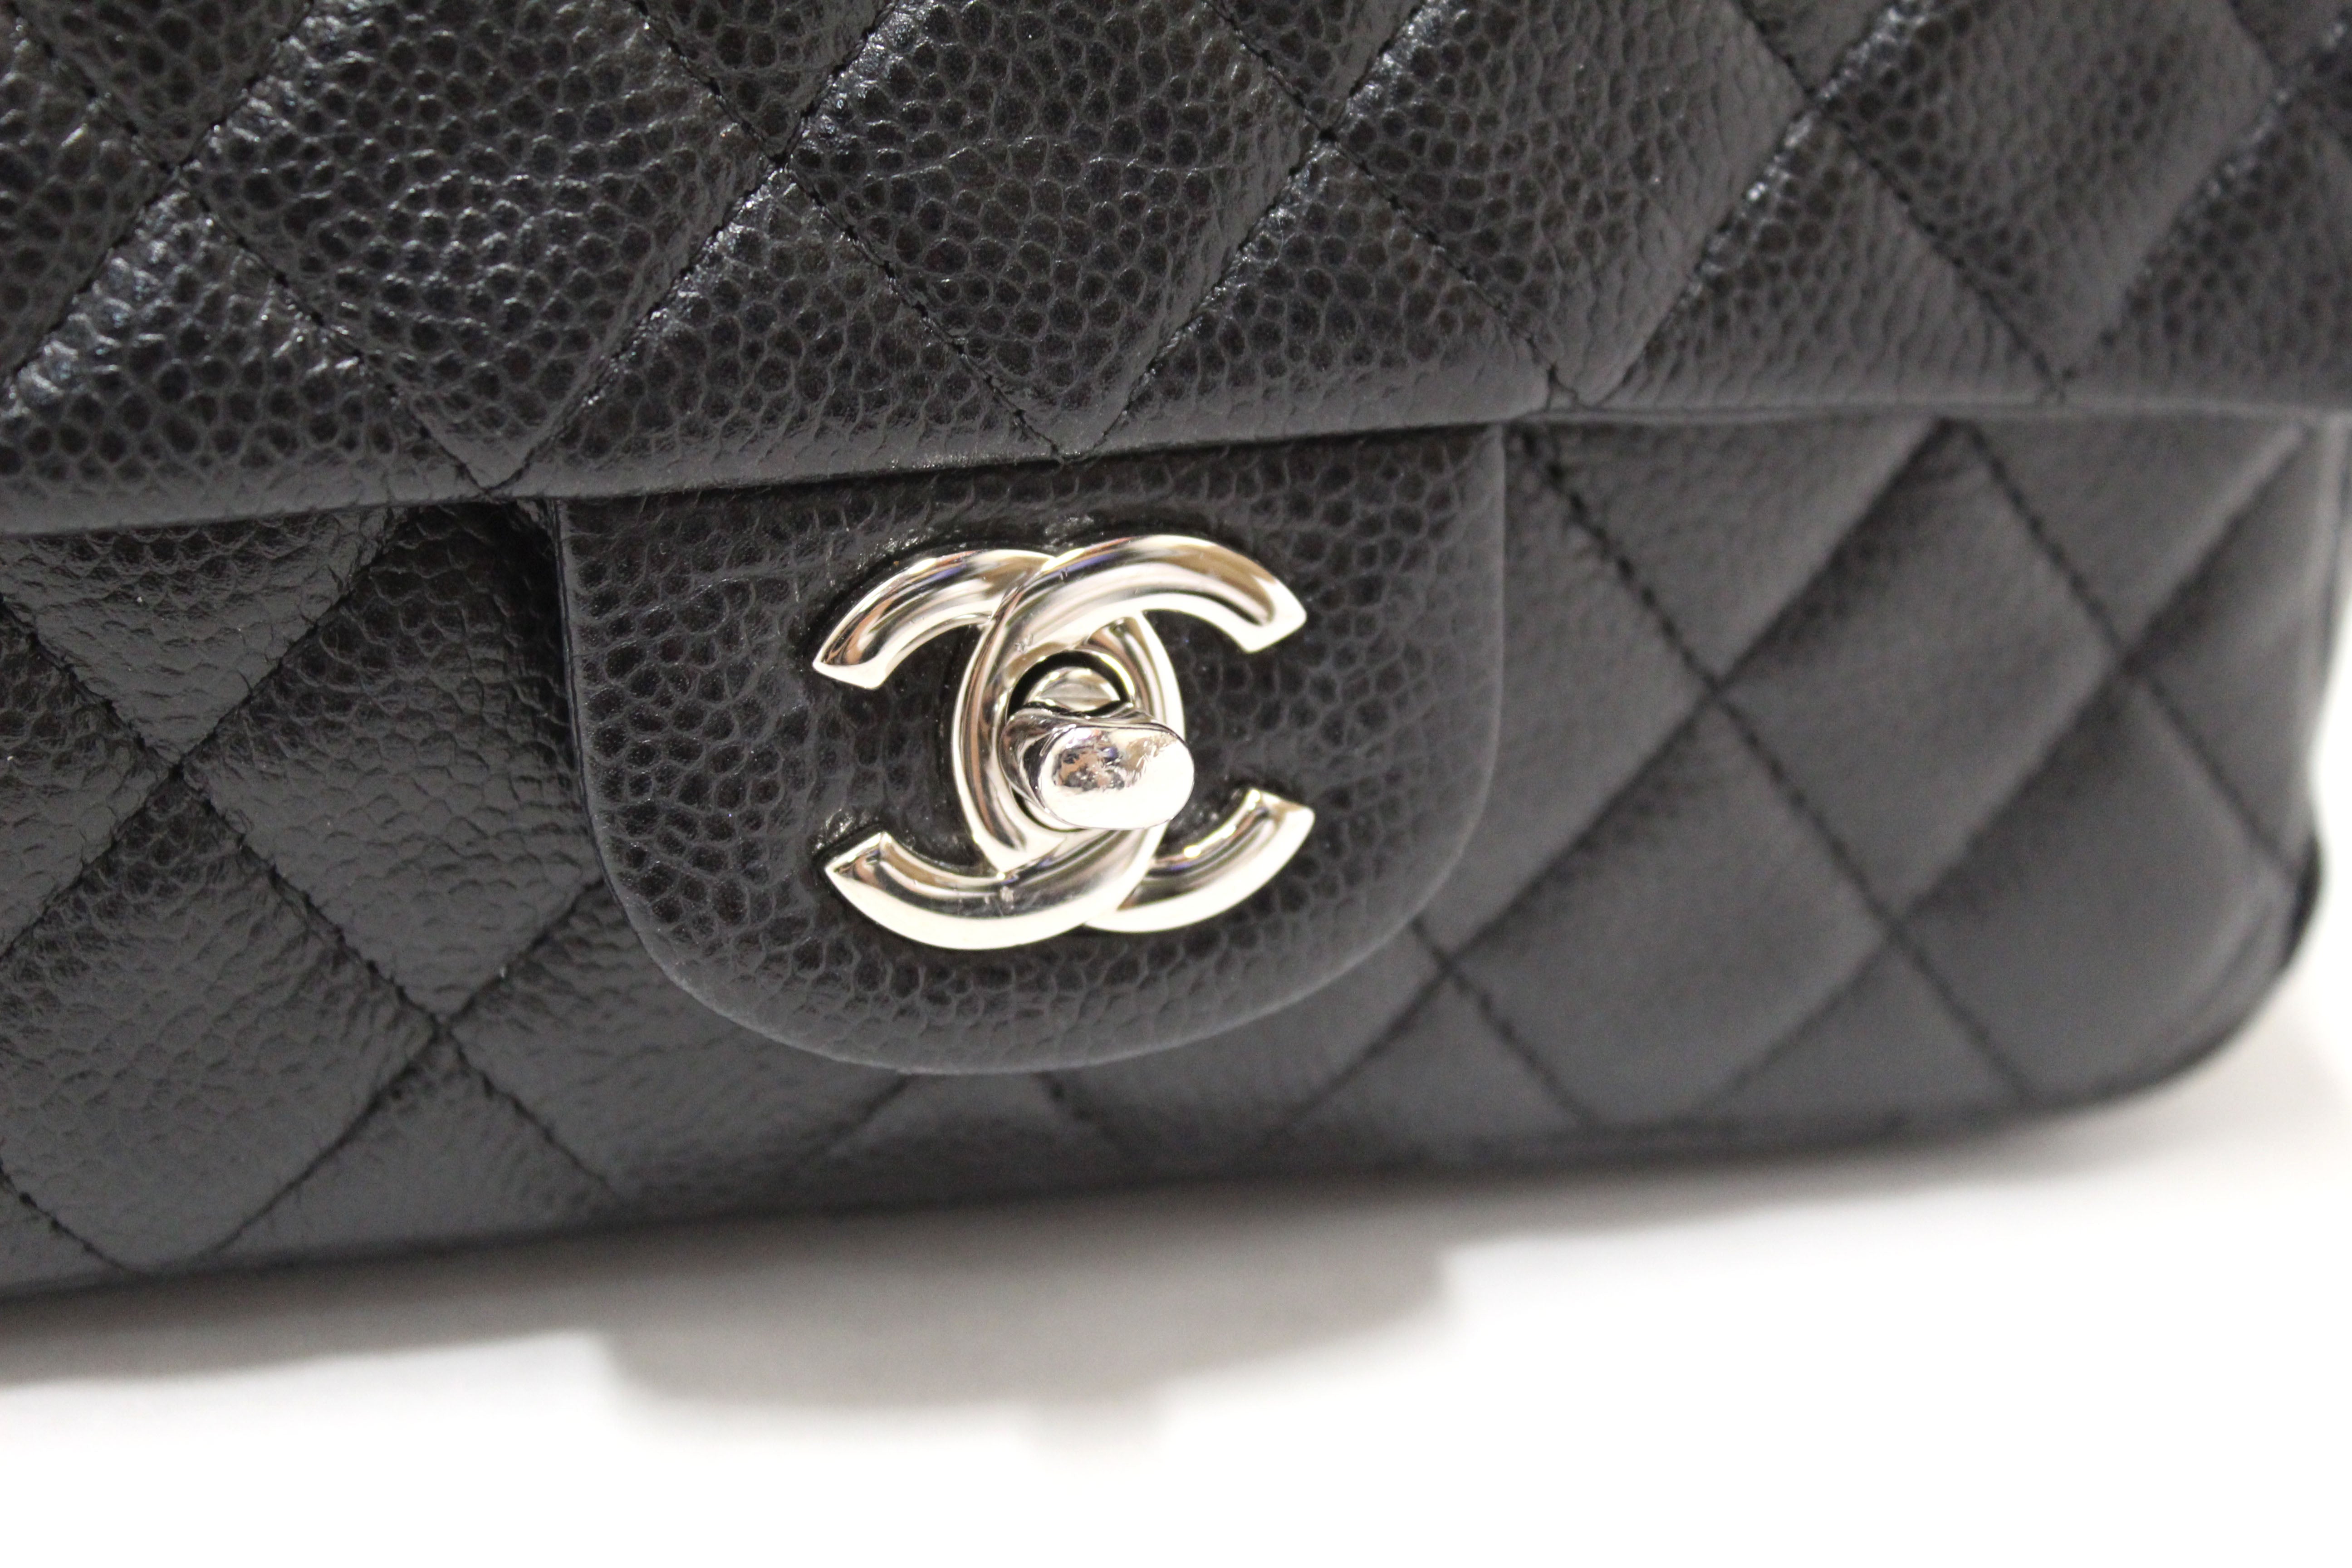 Chanel Black Quilted Caviar Leather Classic Mini Rectangle Flap Crossbody Bag